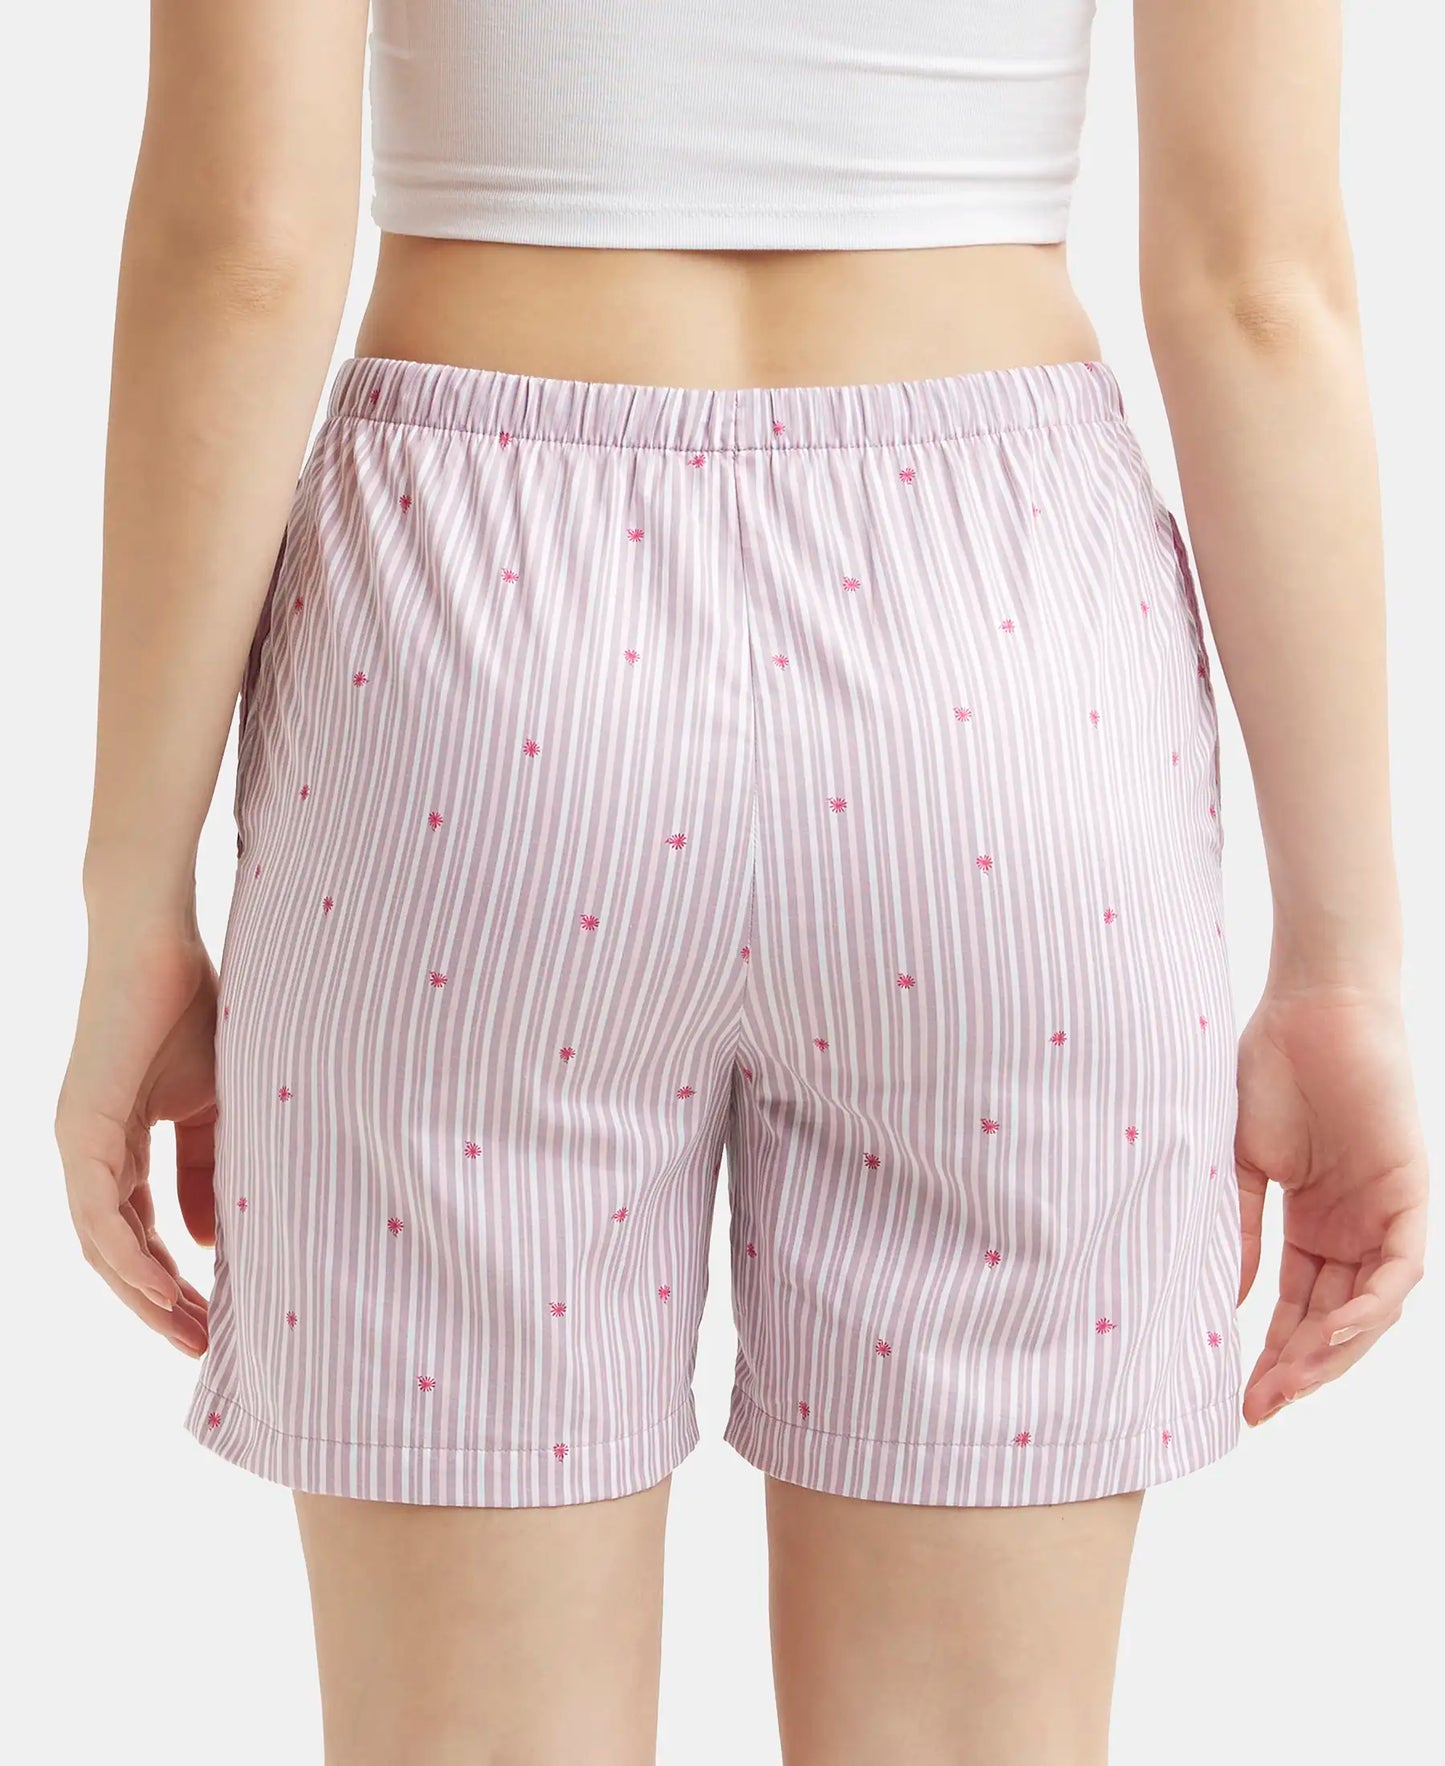 Super Combed Cotton Yarn Dyed Woven Relaxed Fit Striped Shorts with Side Pockets - Old Rose-3